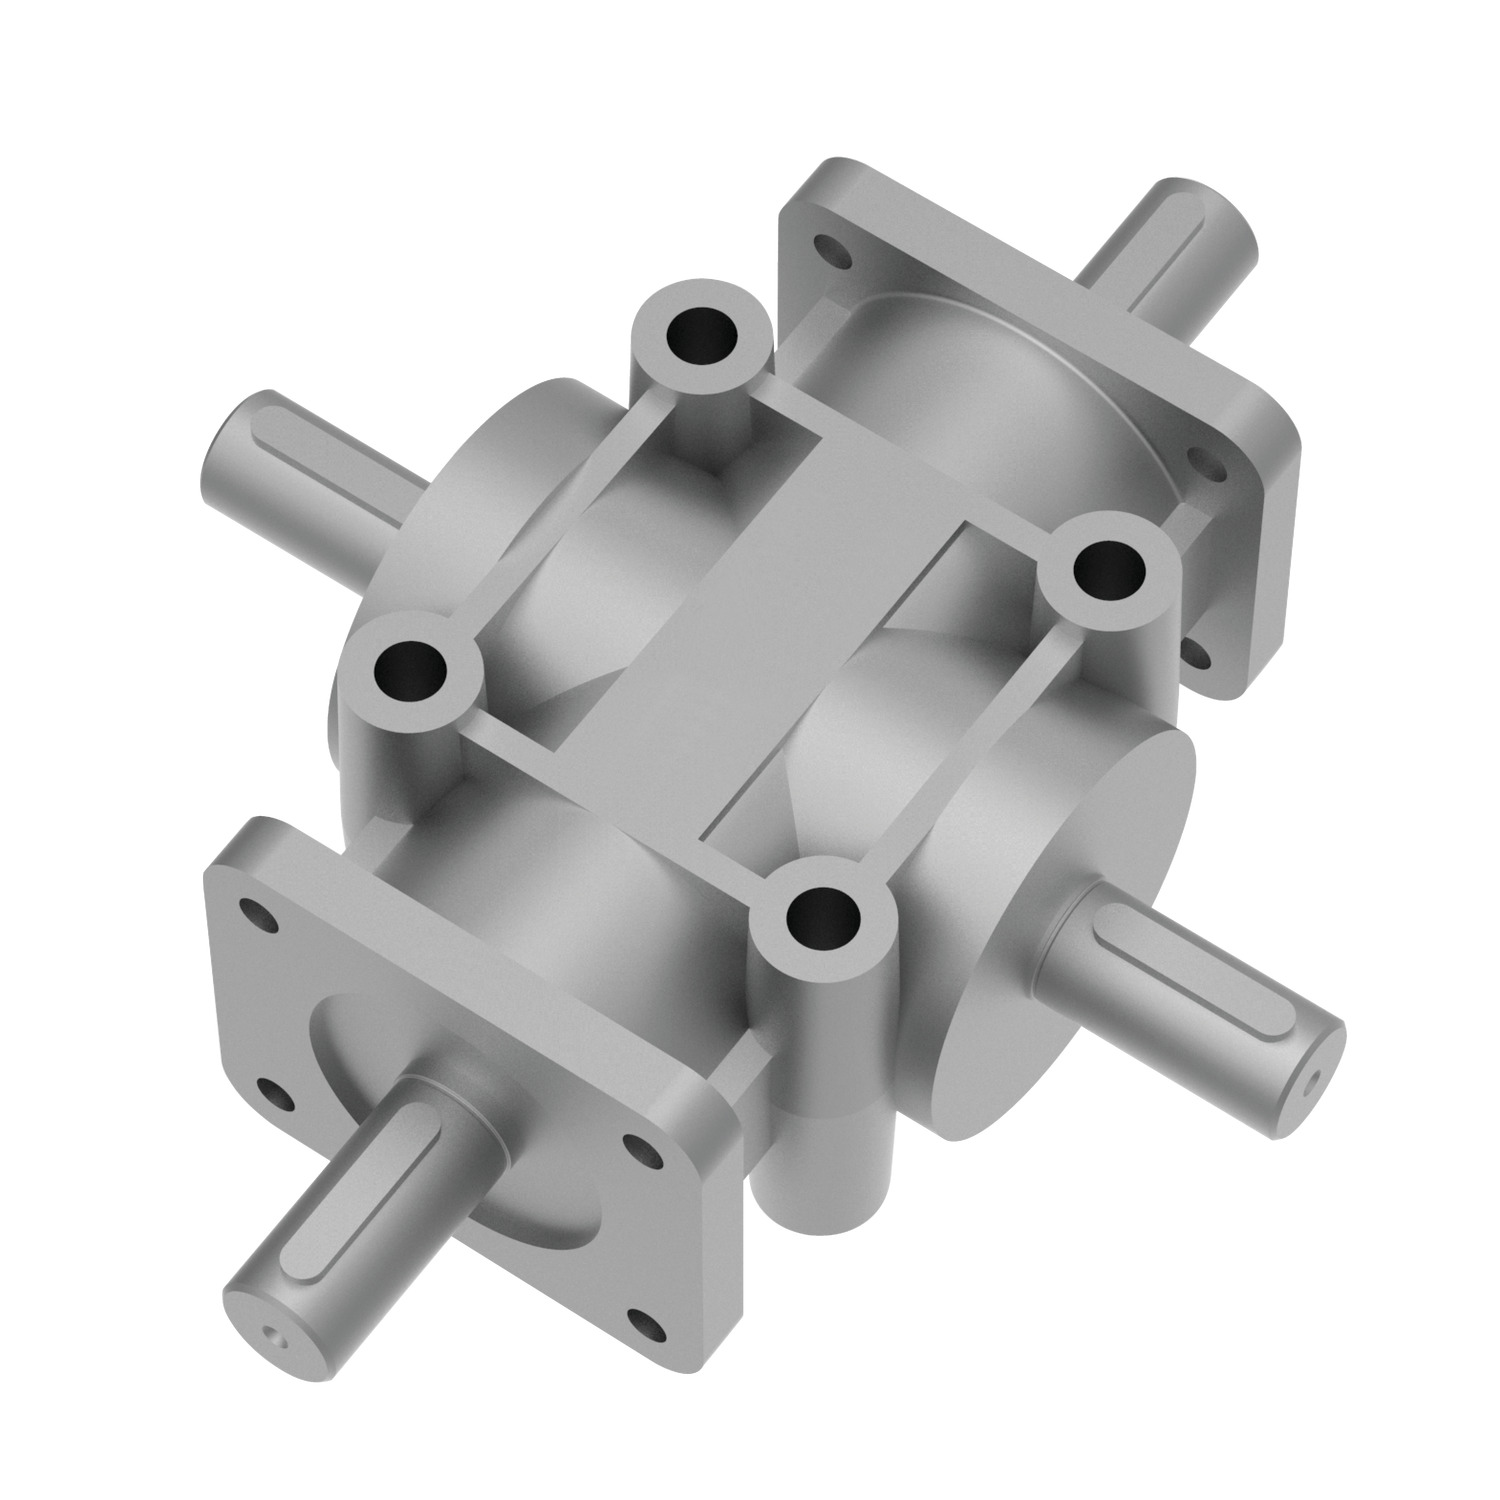 Four Shaft Gear Boxes Four shaft right angle gear boxes, currently available in size Ø24 shafts. Made from lightweight aluminium alloy housing with case-hardened steel gears and shafts.